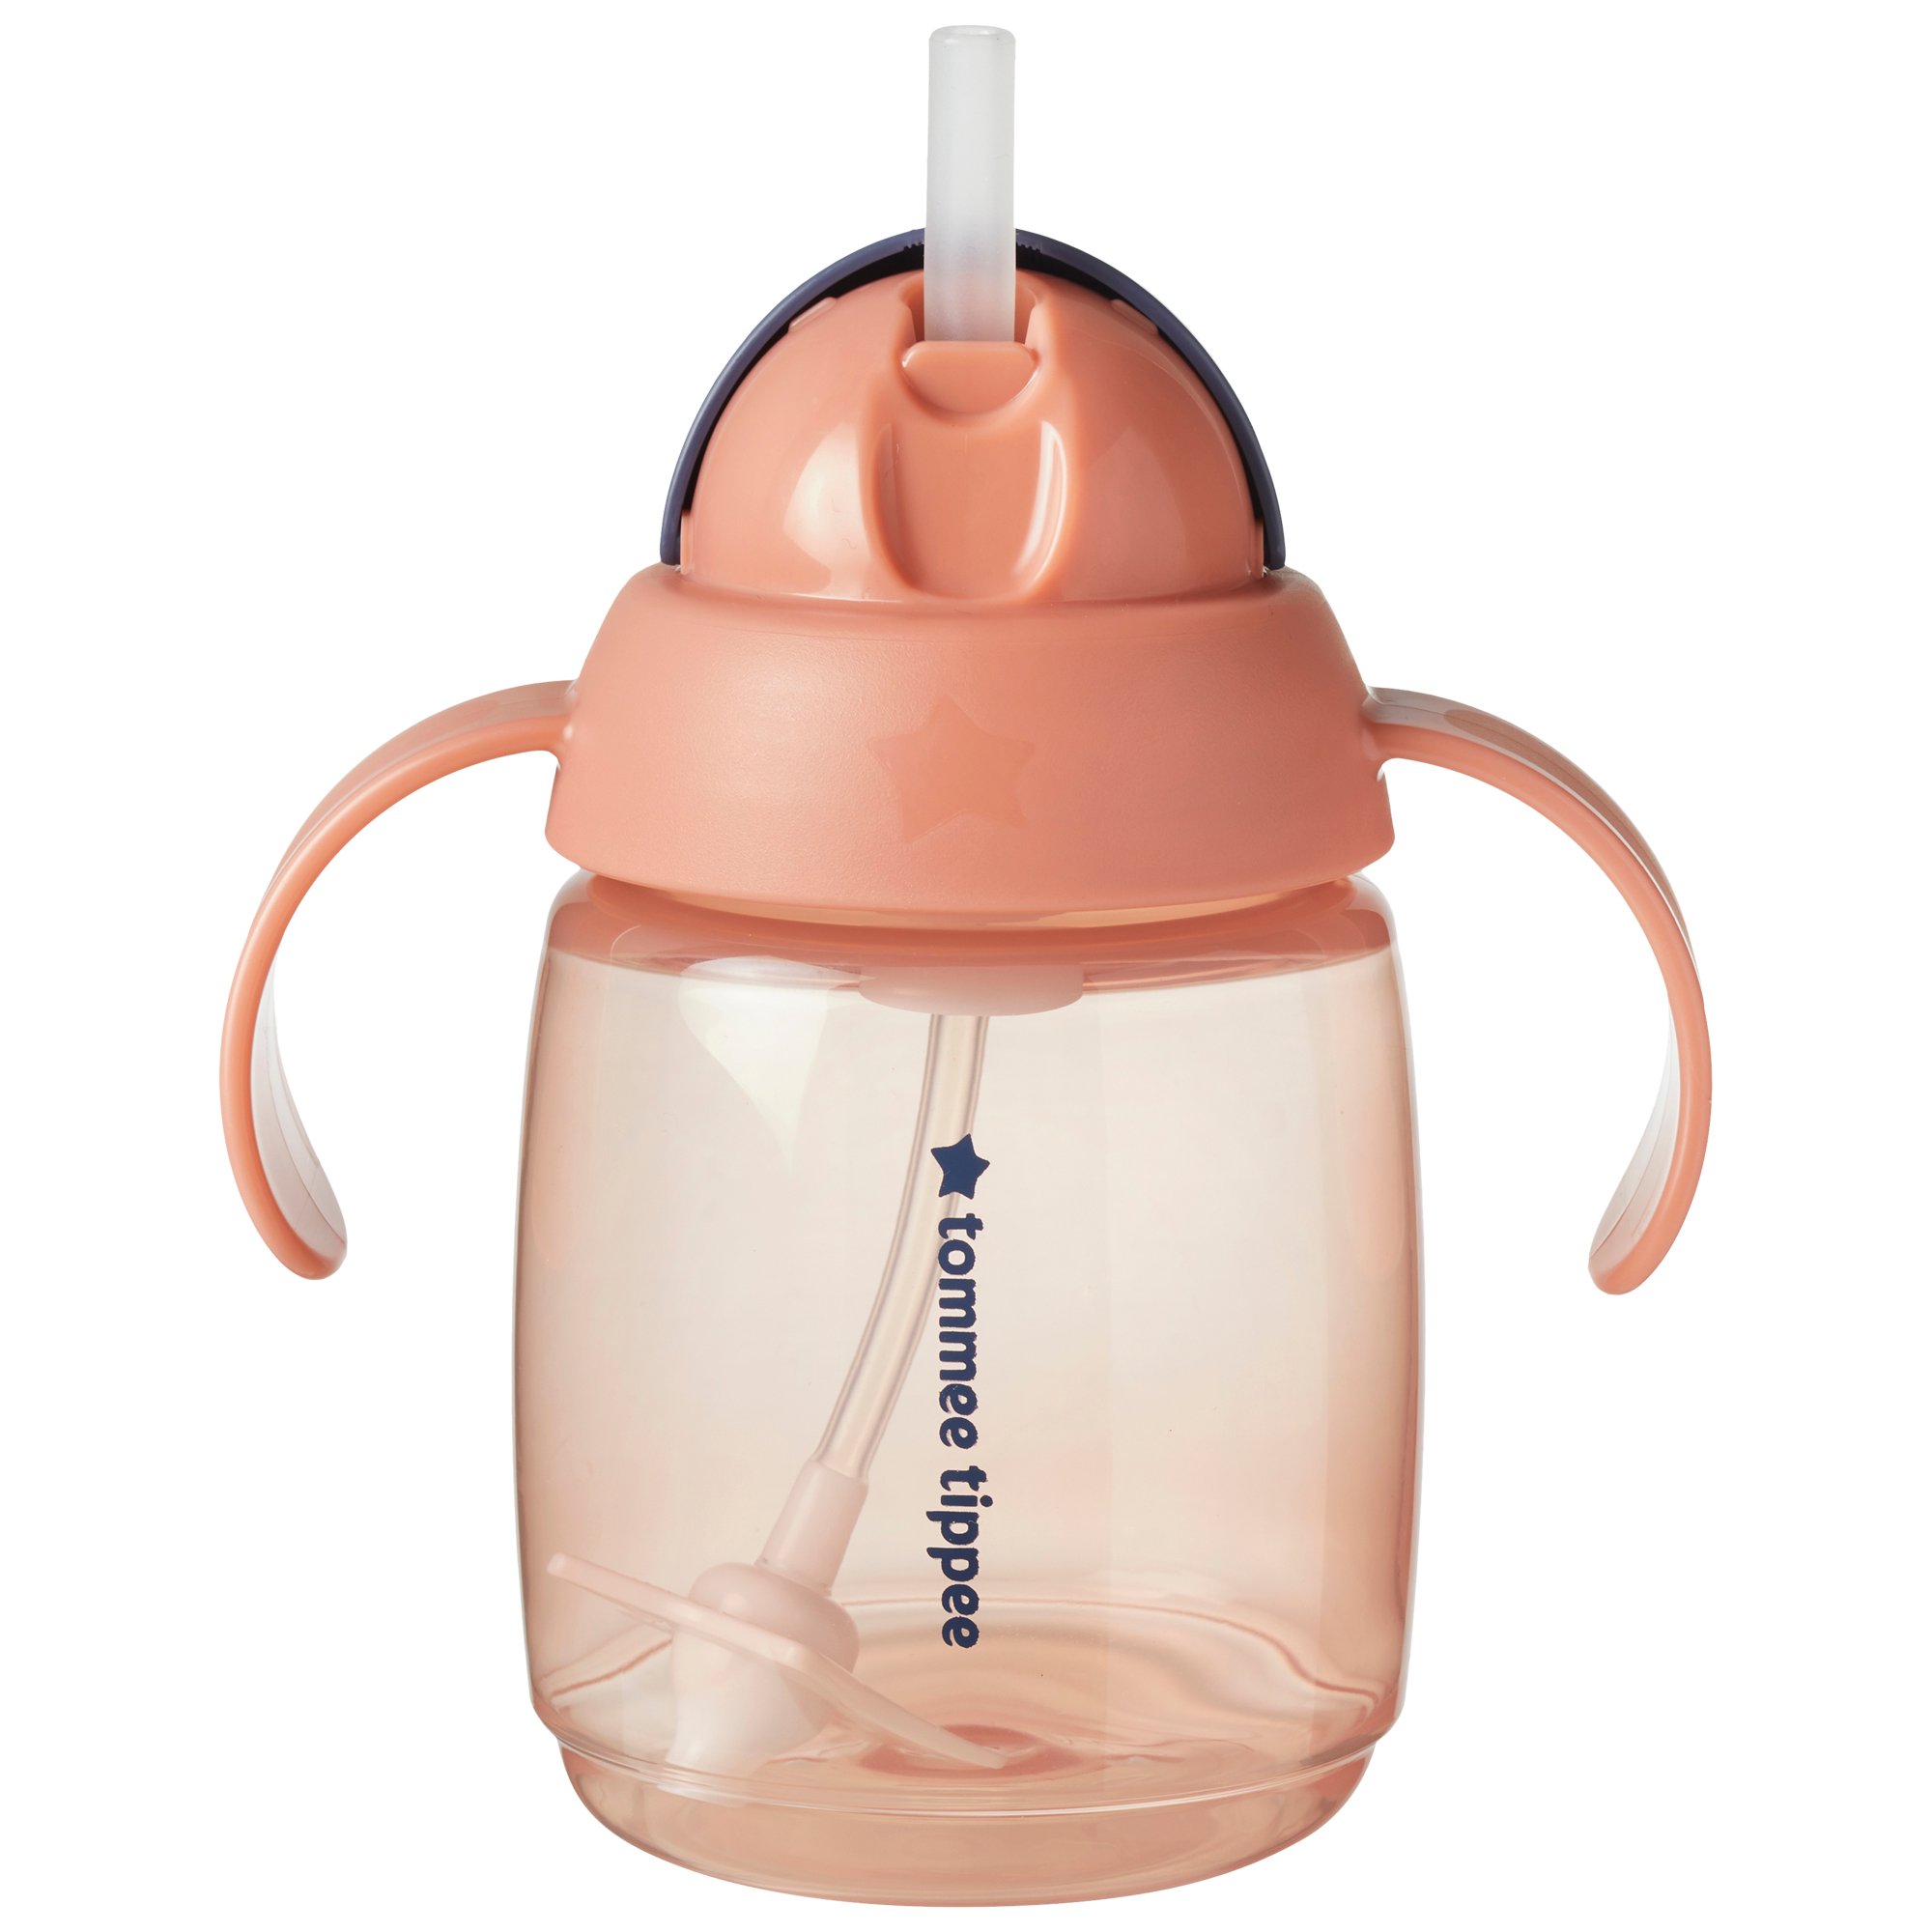 Munchkin Any Angle Weighted Straw Cup - 12m+ - Shop Cups at H-E-B